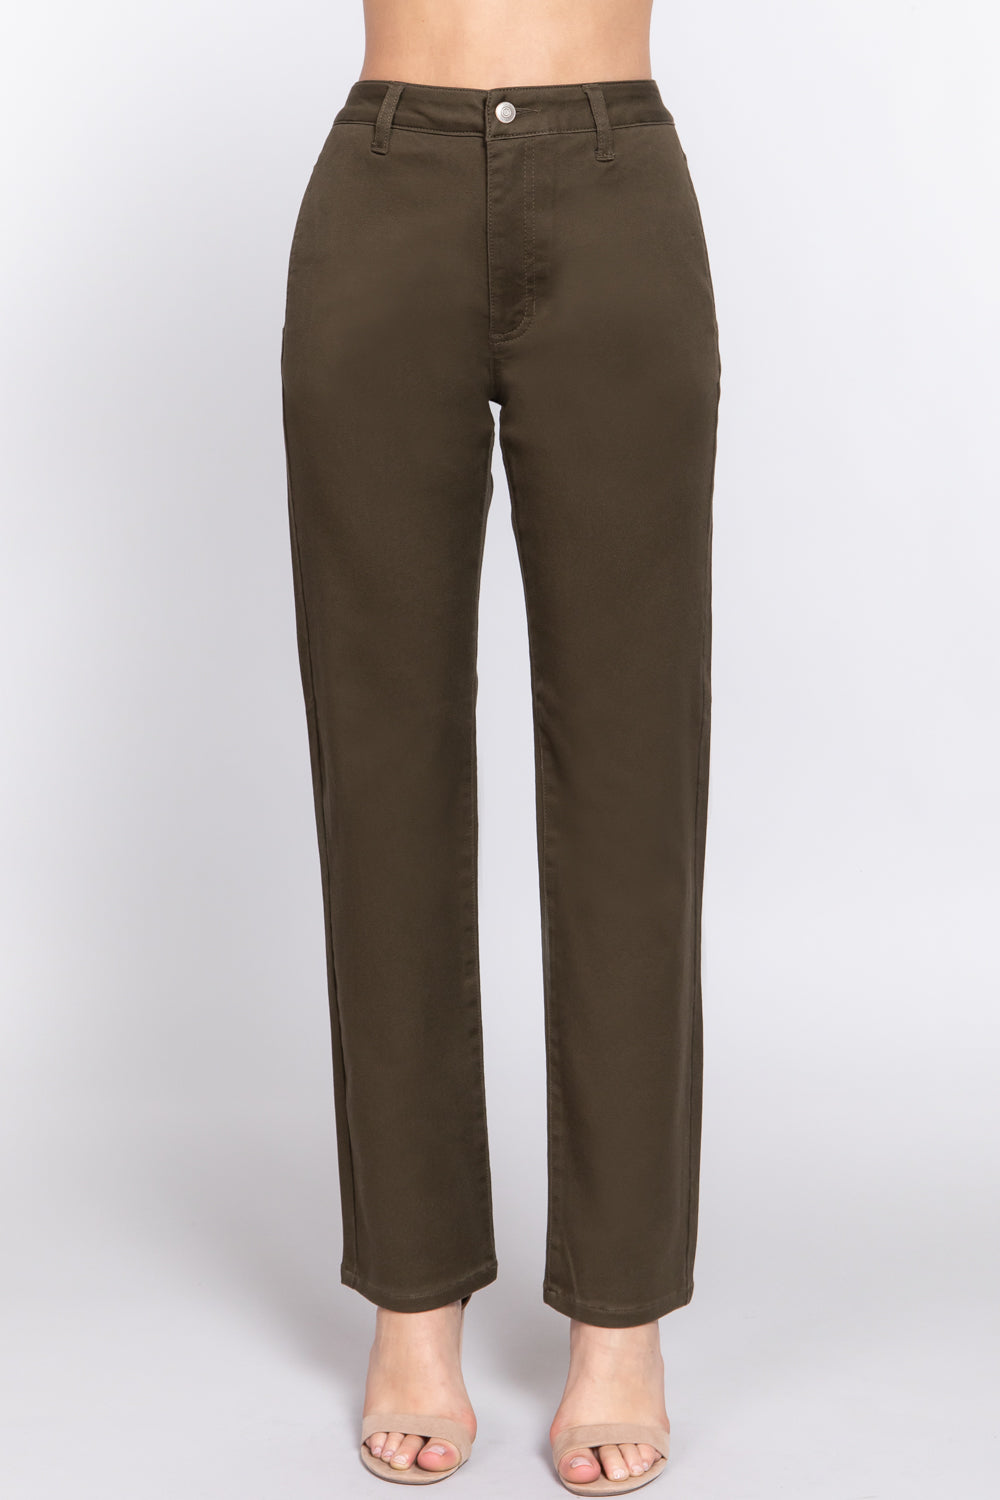 Olive - Straight Fit Twill Long Pants - 5 colors - womens pants at TFC&H Co.